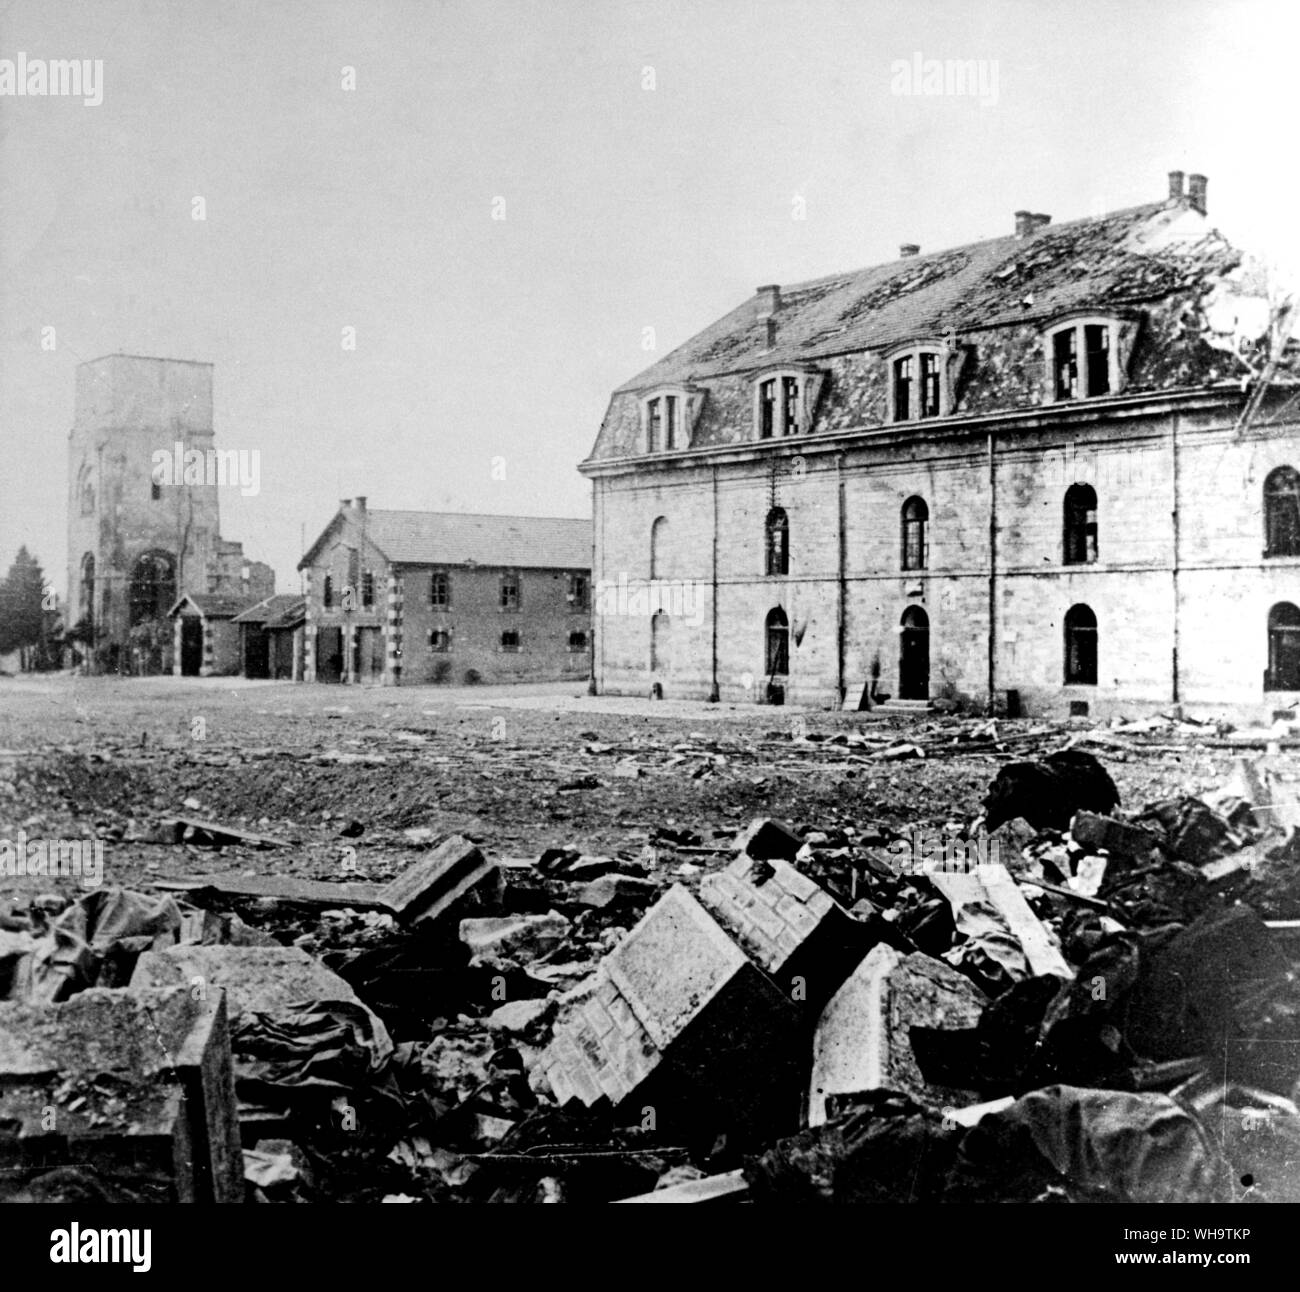 WW1/France: Scene of ruins in French town. Stock Photo